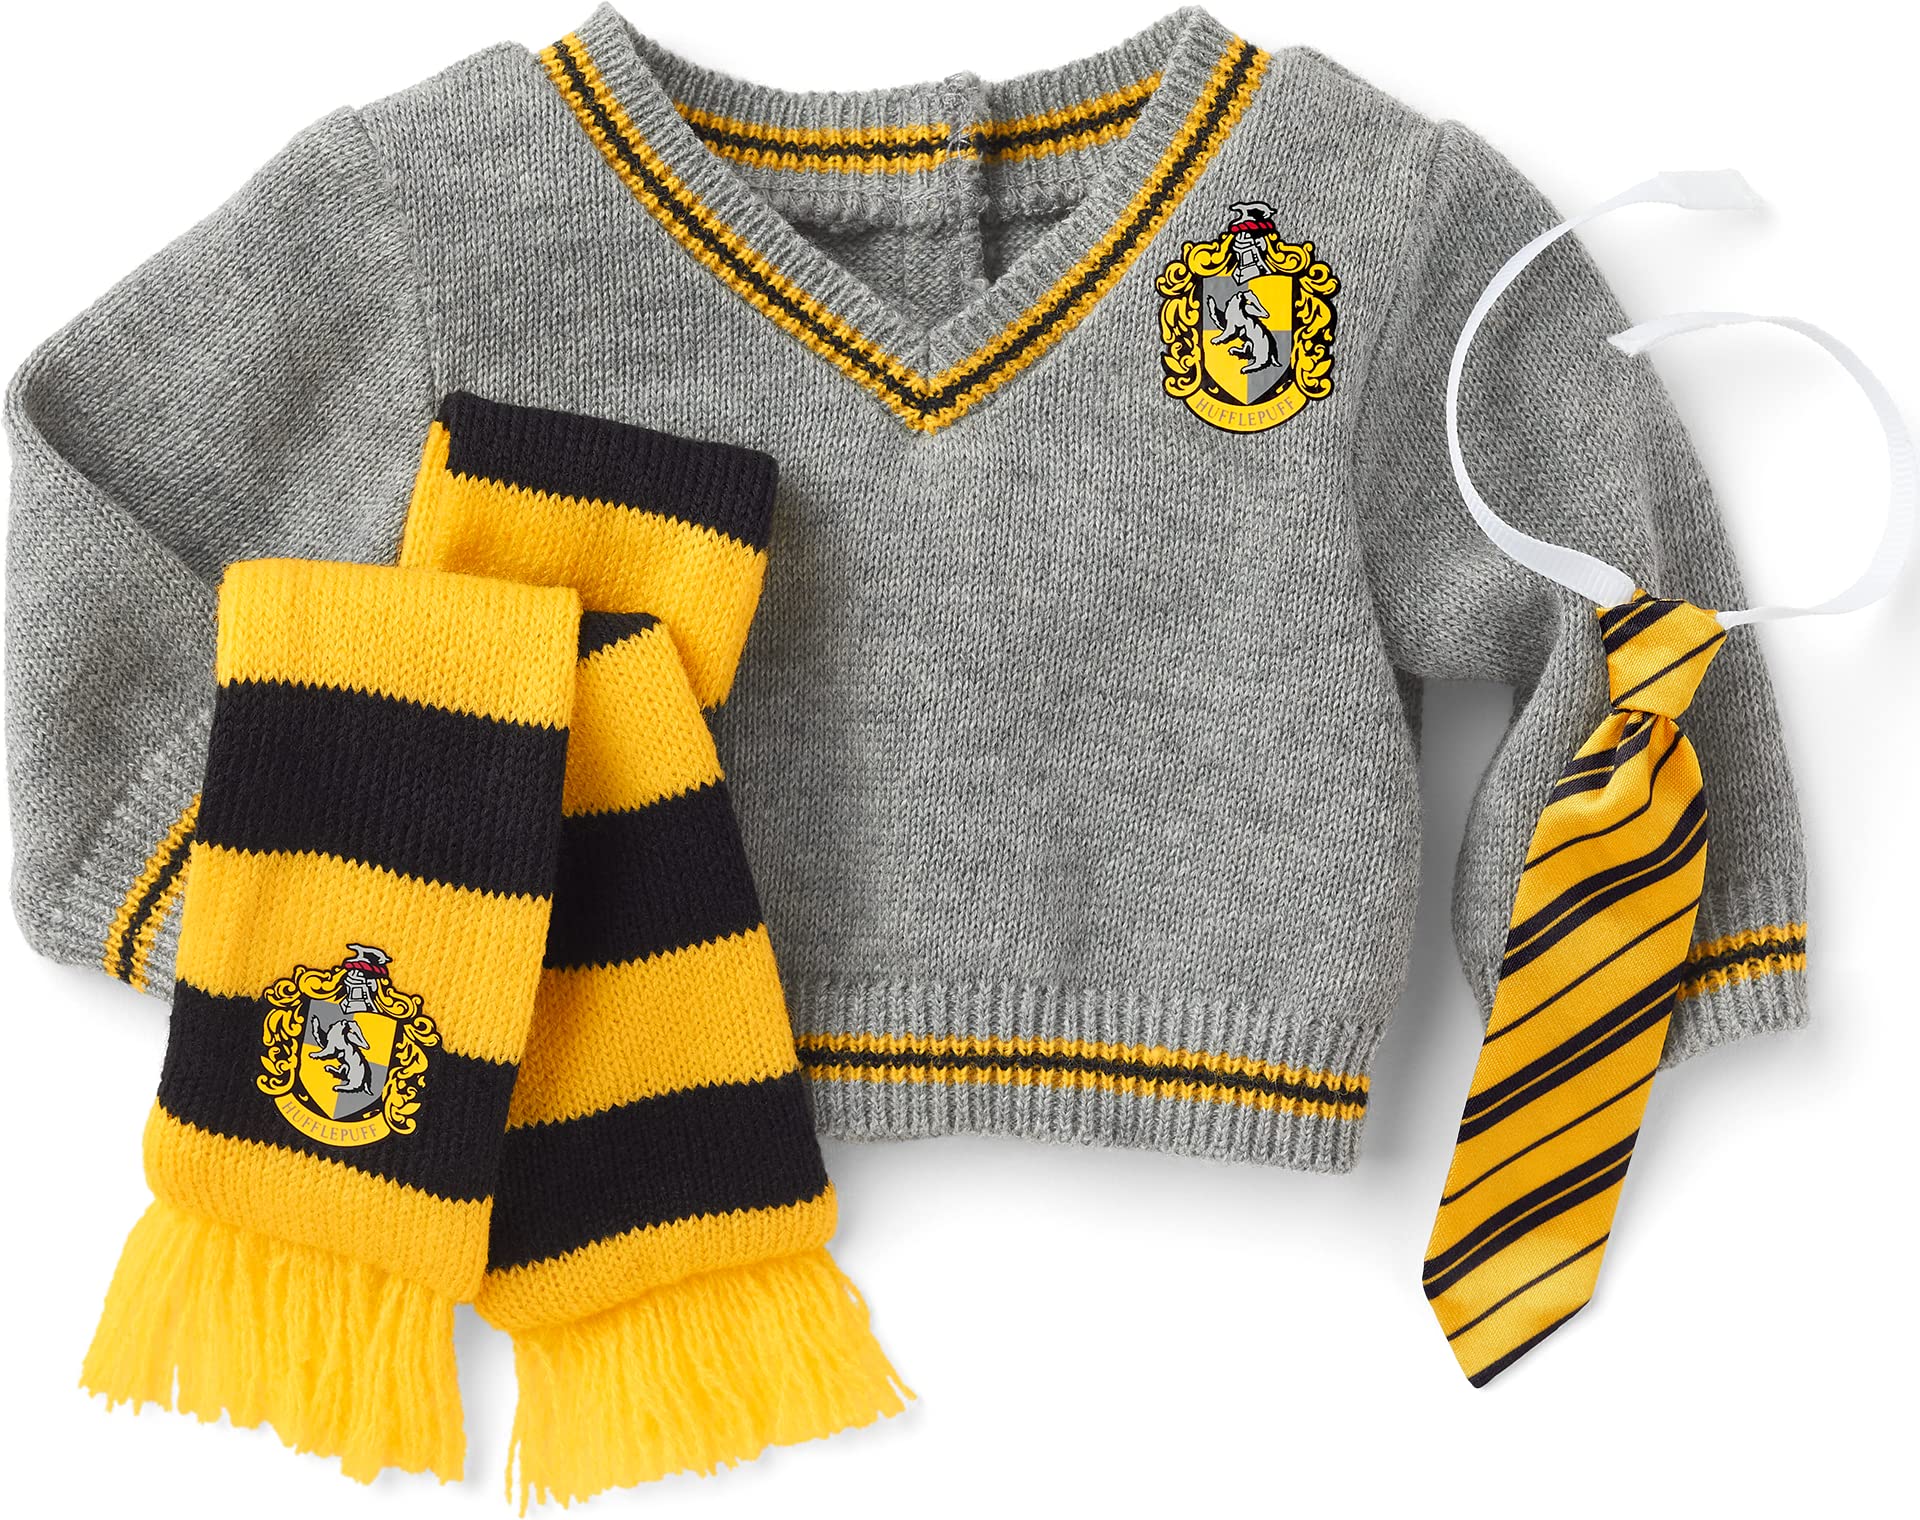 American Girl Harry Potter Hufflepuff 3-Piece Set for 18-inch Dolls with Yellow-and-Black-Trimmed Gray Sweater, Satin tie, Yellow-and-Black Knit Scarf Featuring The Hufflepuff Crest Doll Not Included